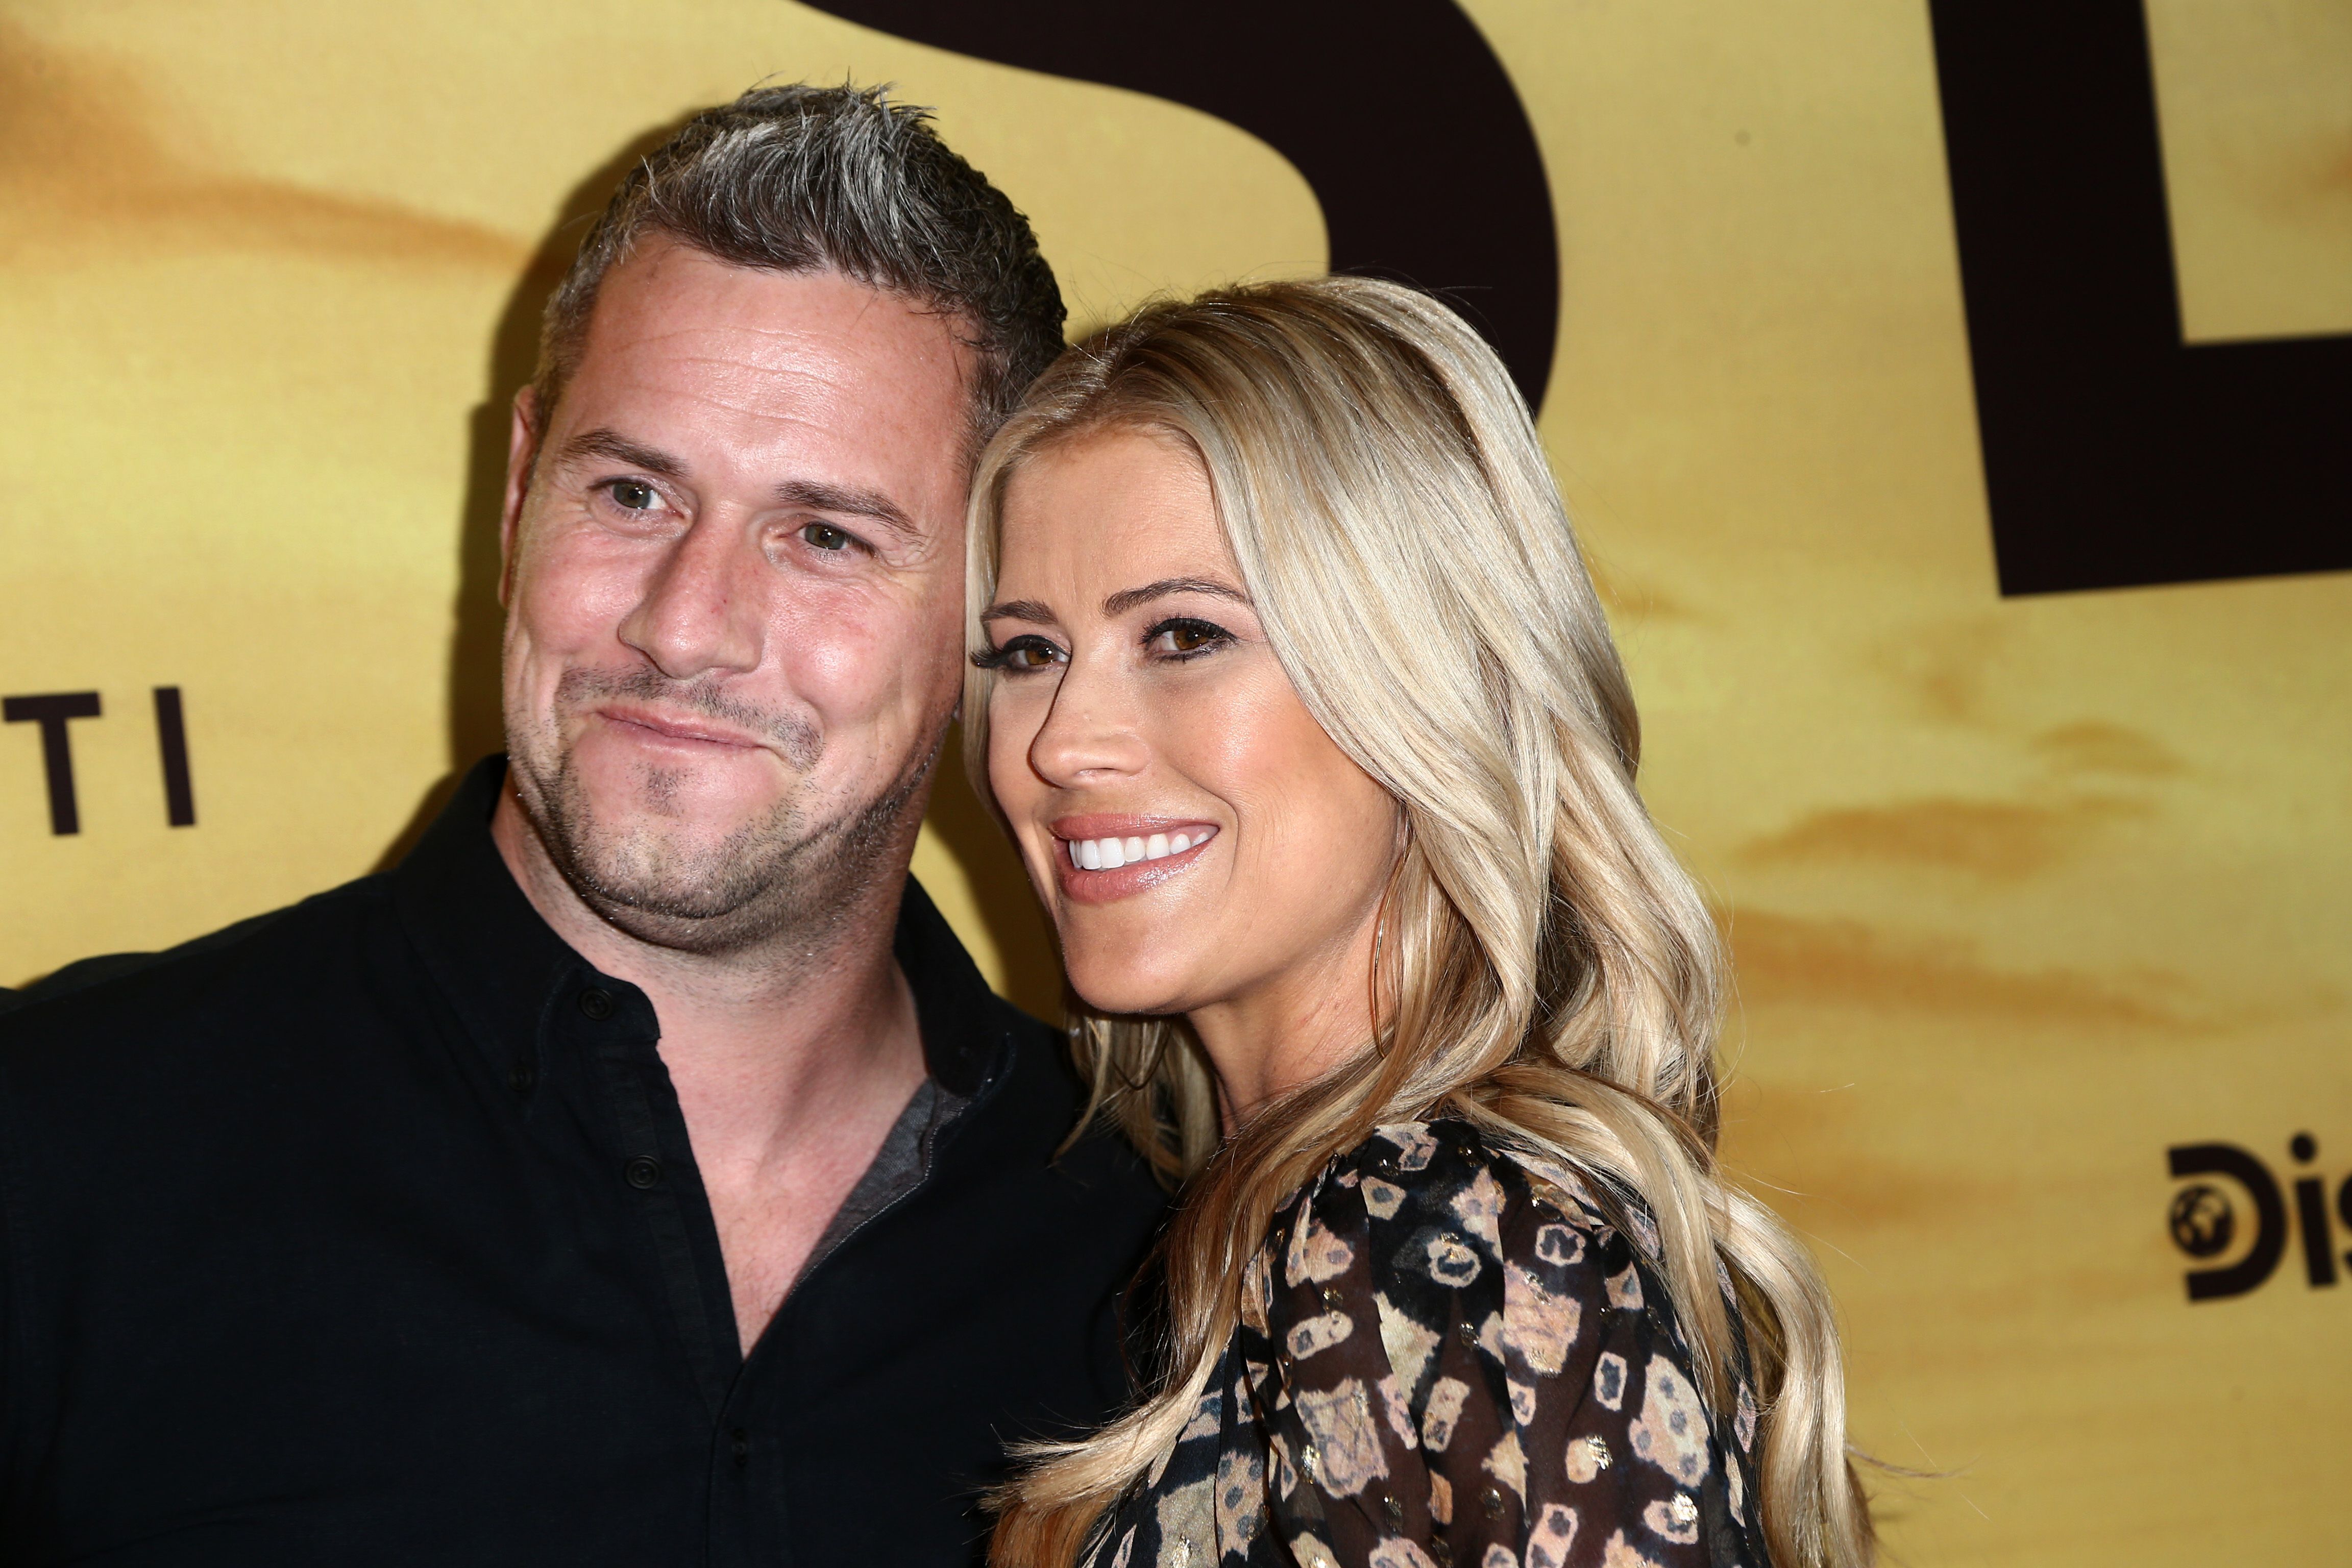 Christina and Ant Anstead at a special screening of "Serengeti" in July 2019 in Beverly Hills | Photo: Getty Images